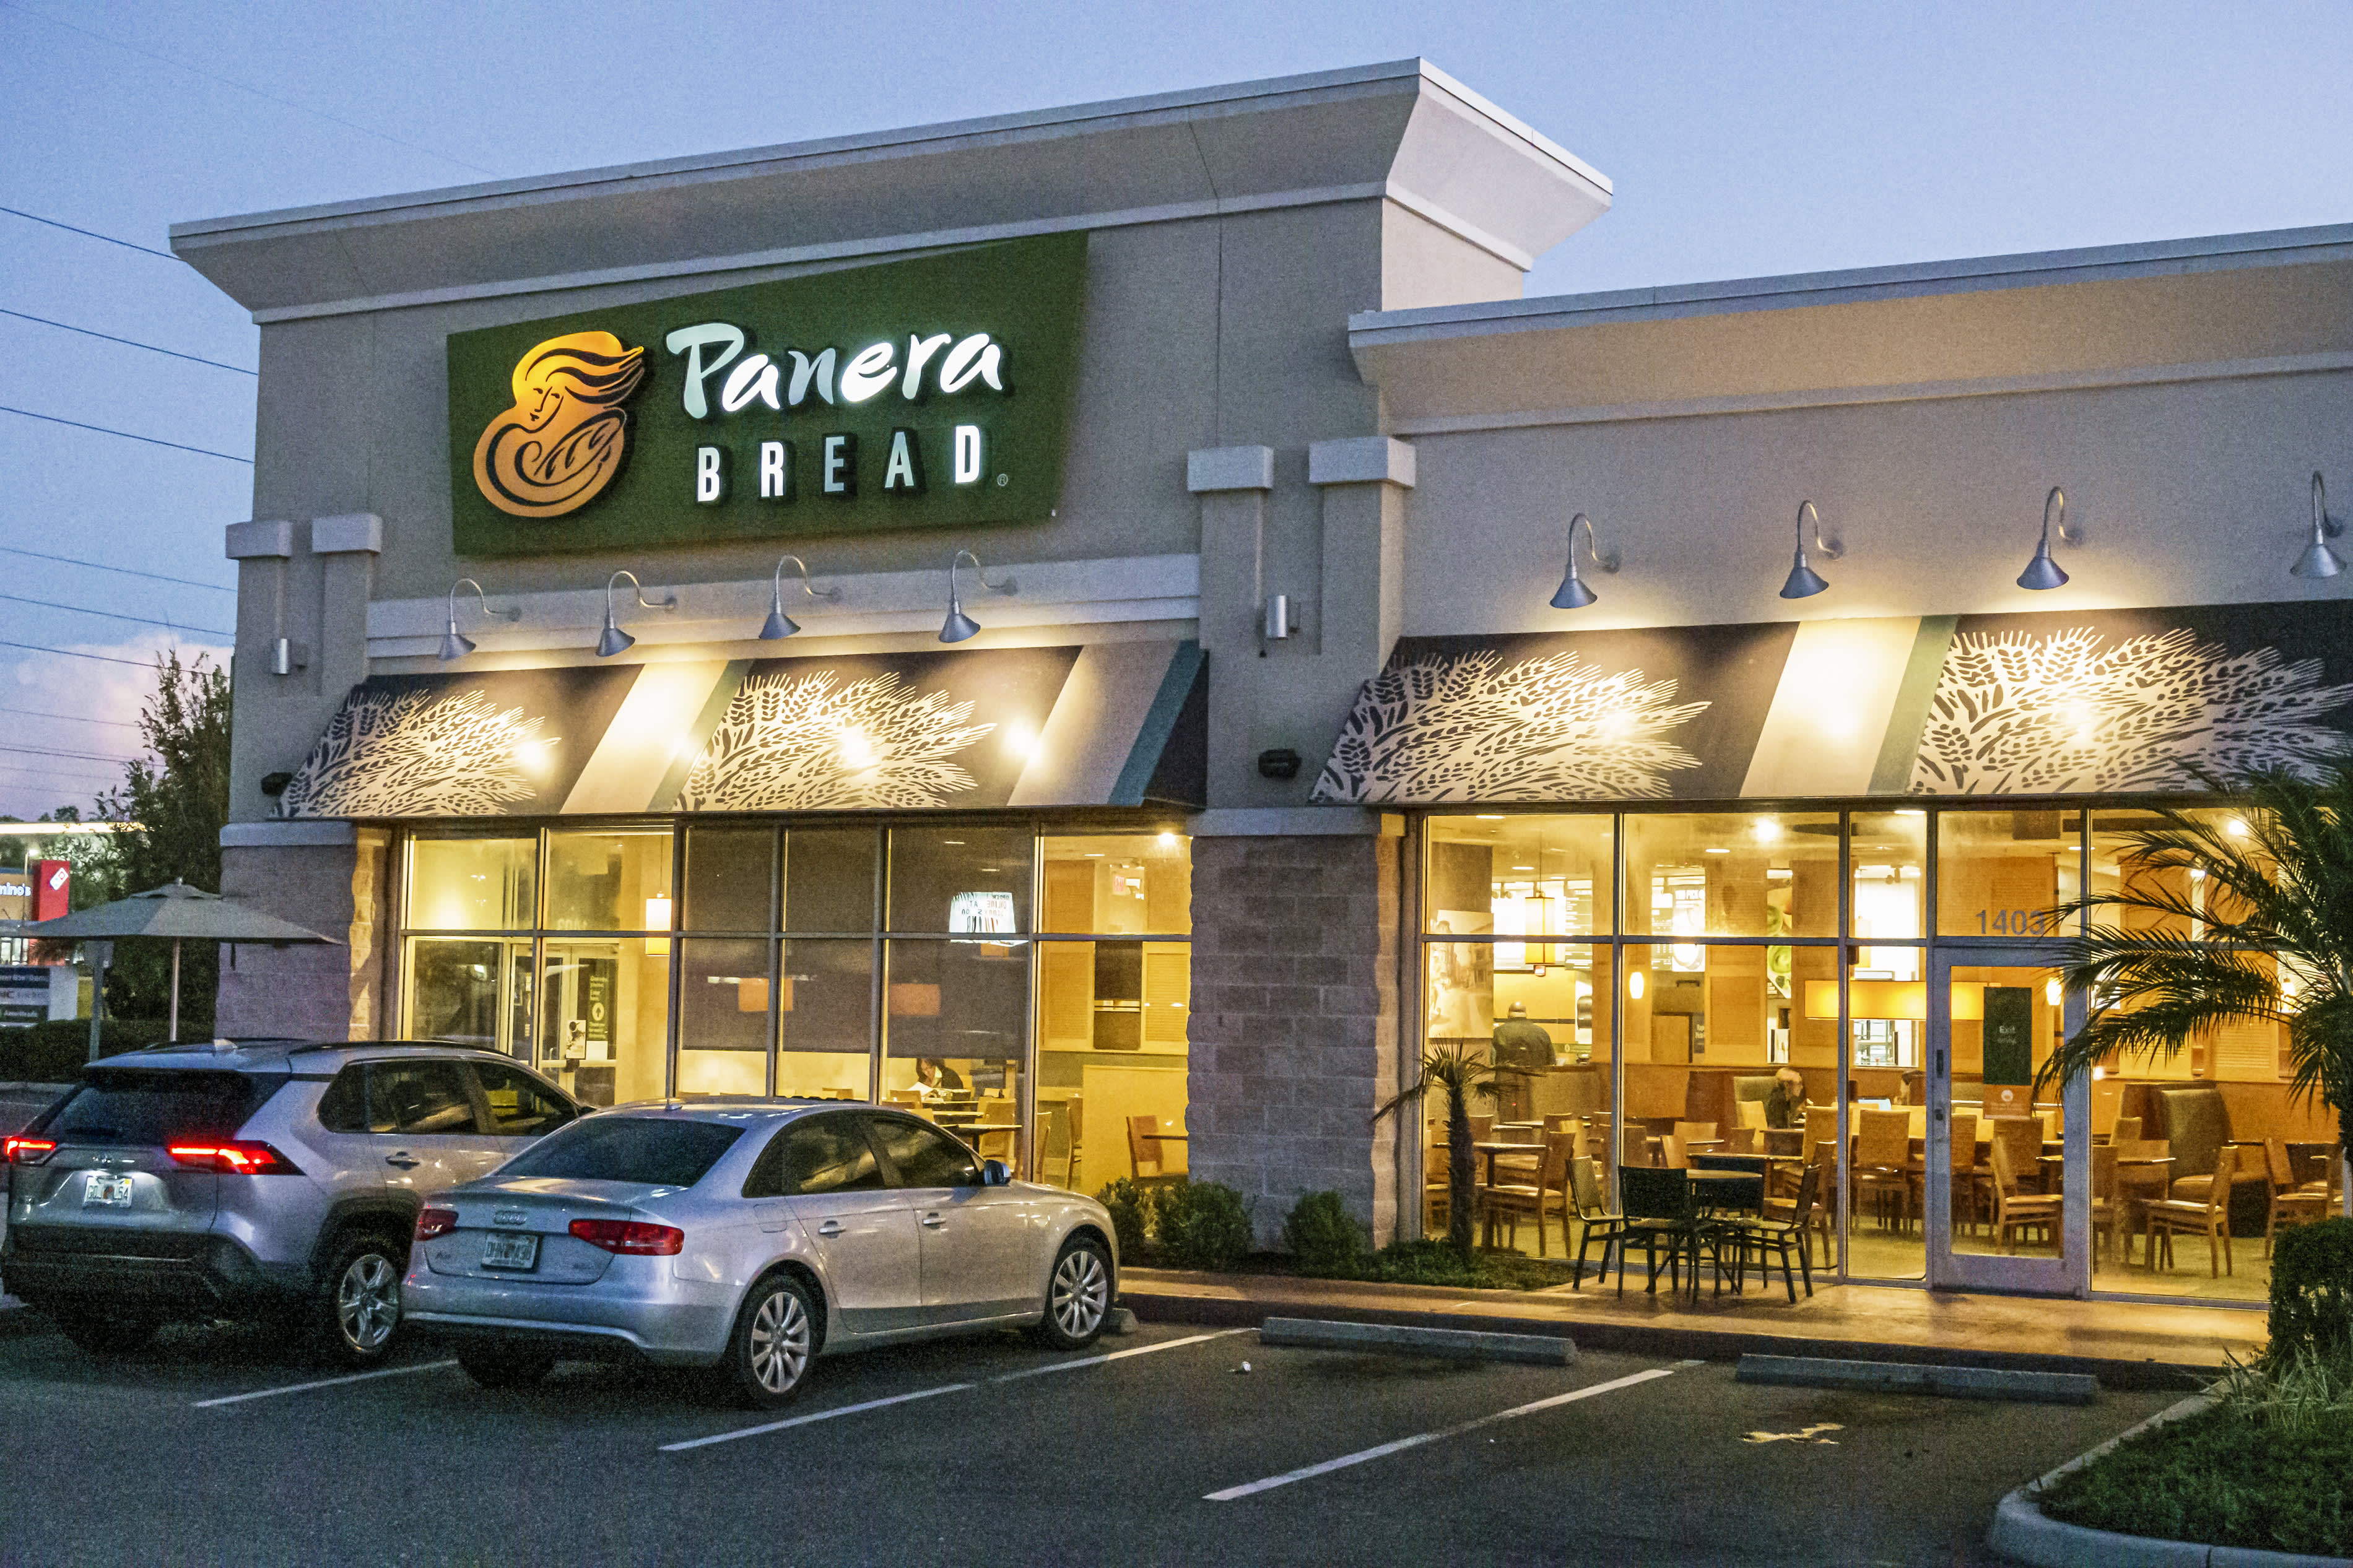 Panera Bread announces SPAC investment, will return to the public markets through an IPO